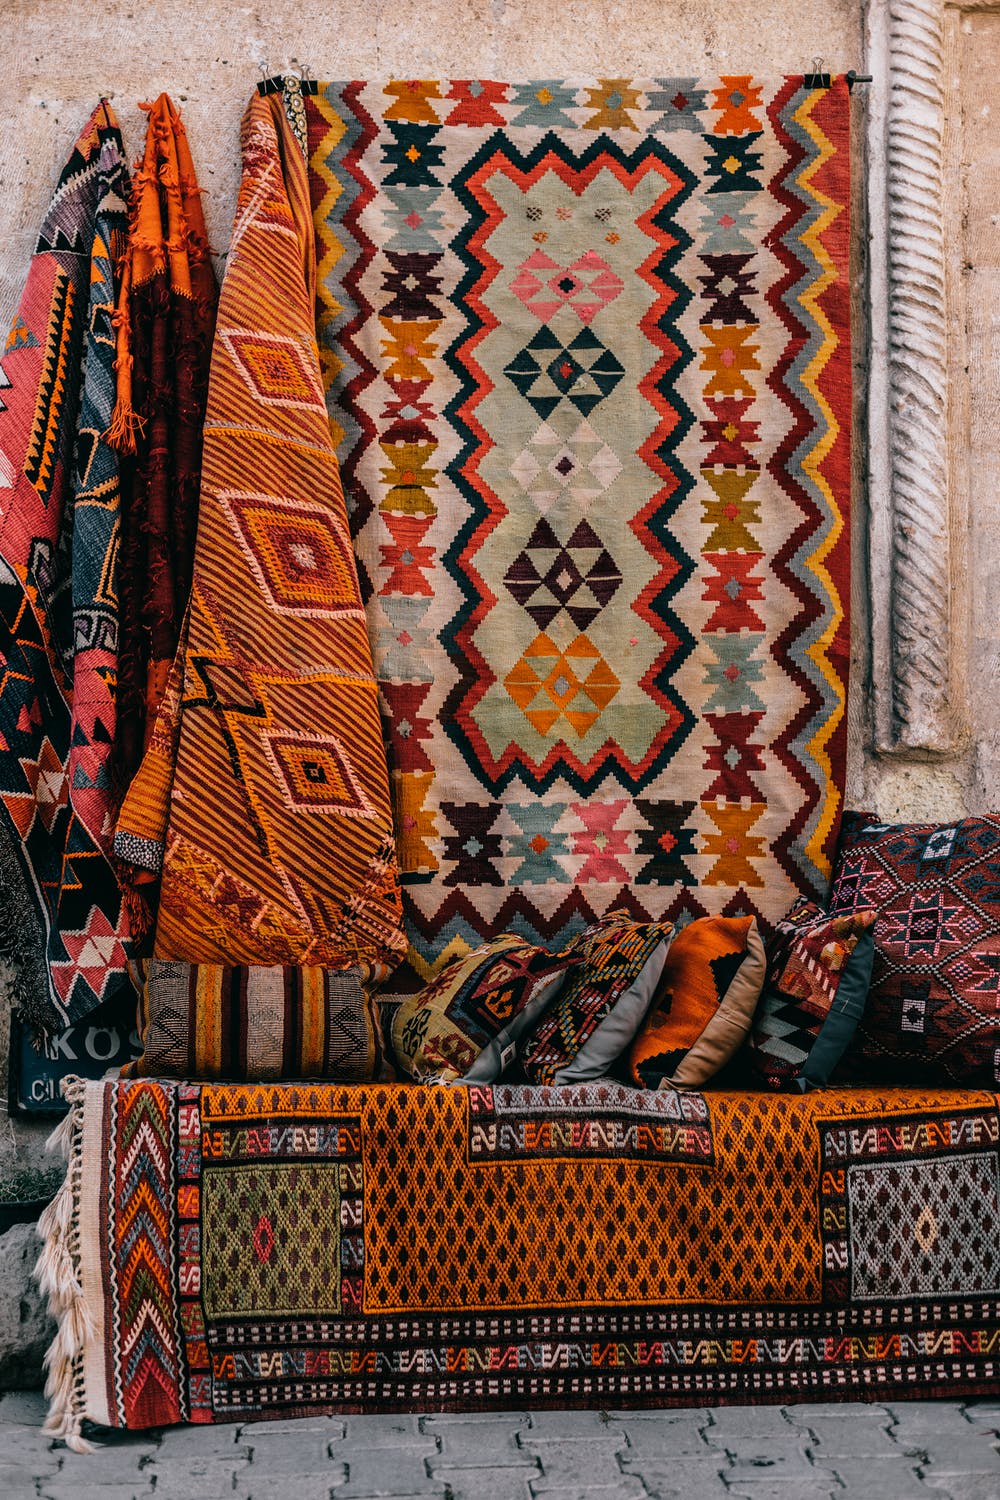 A multi-colored kilim is displayed in front of a stone wall surrounded by other rugs and tapestries at a market.